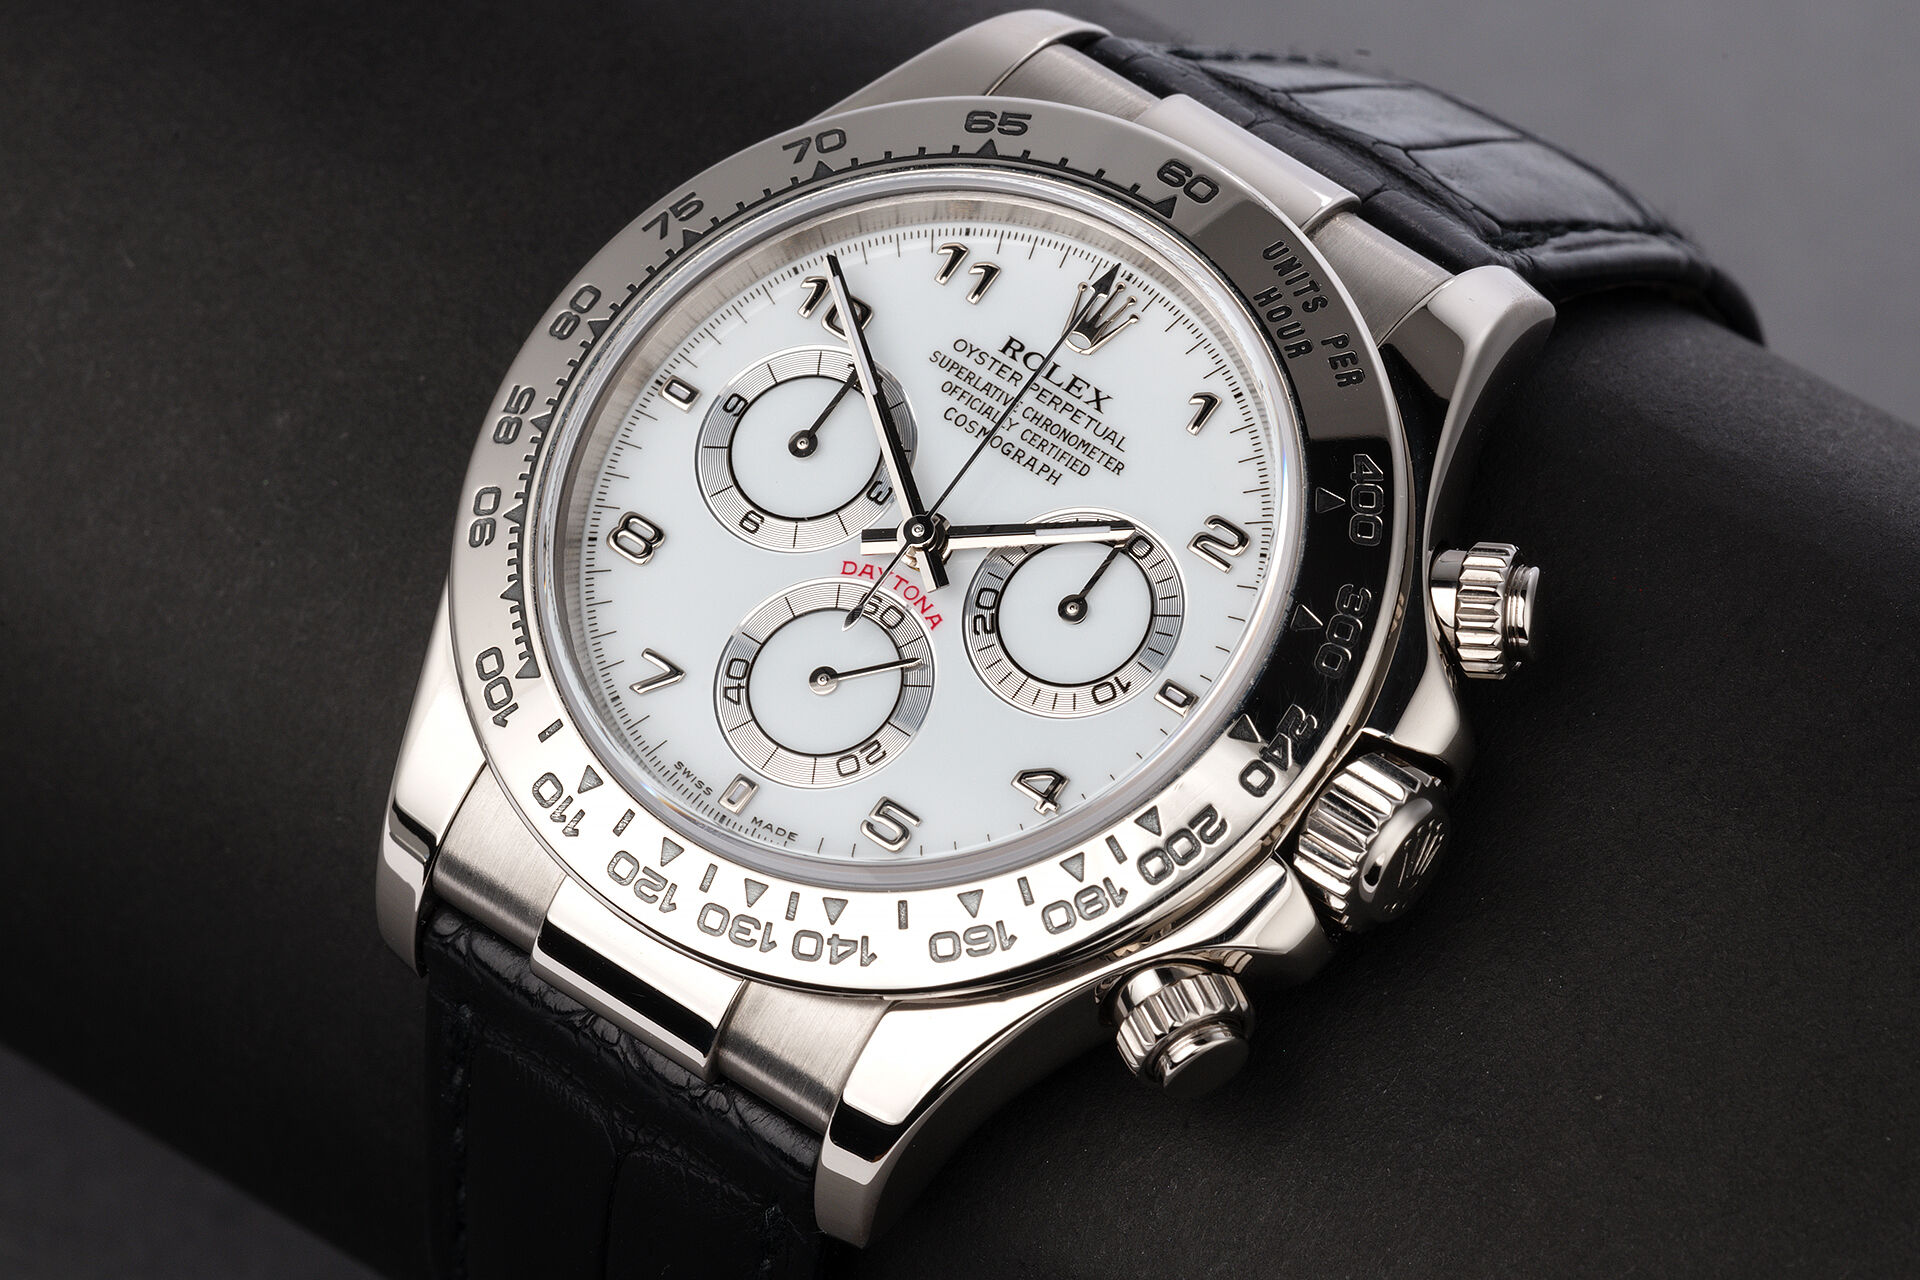 ref 116519 | Just Serviced with Rolex UK | Rolex Cosmograph Daytona